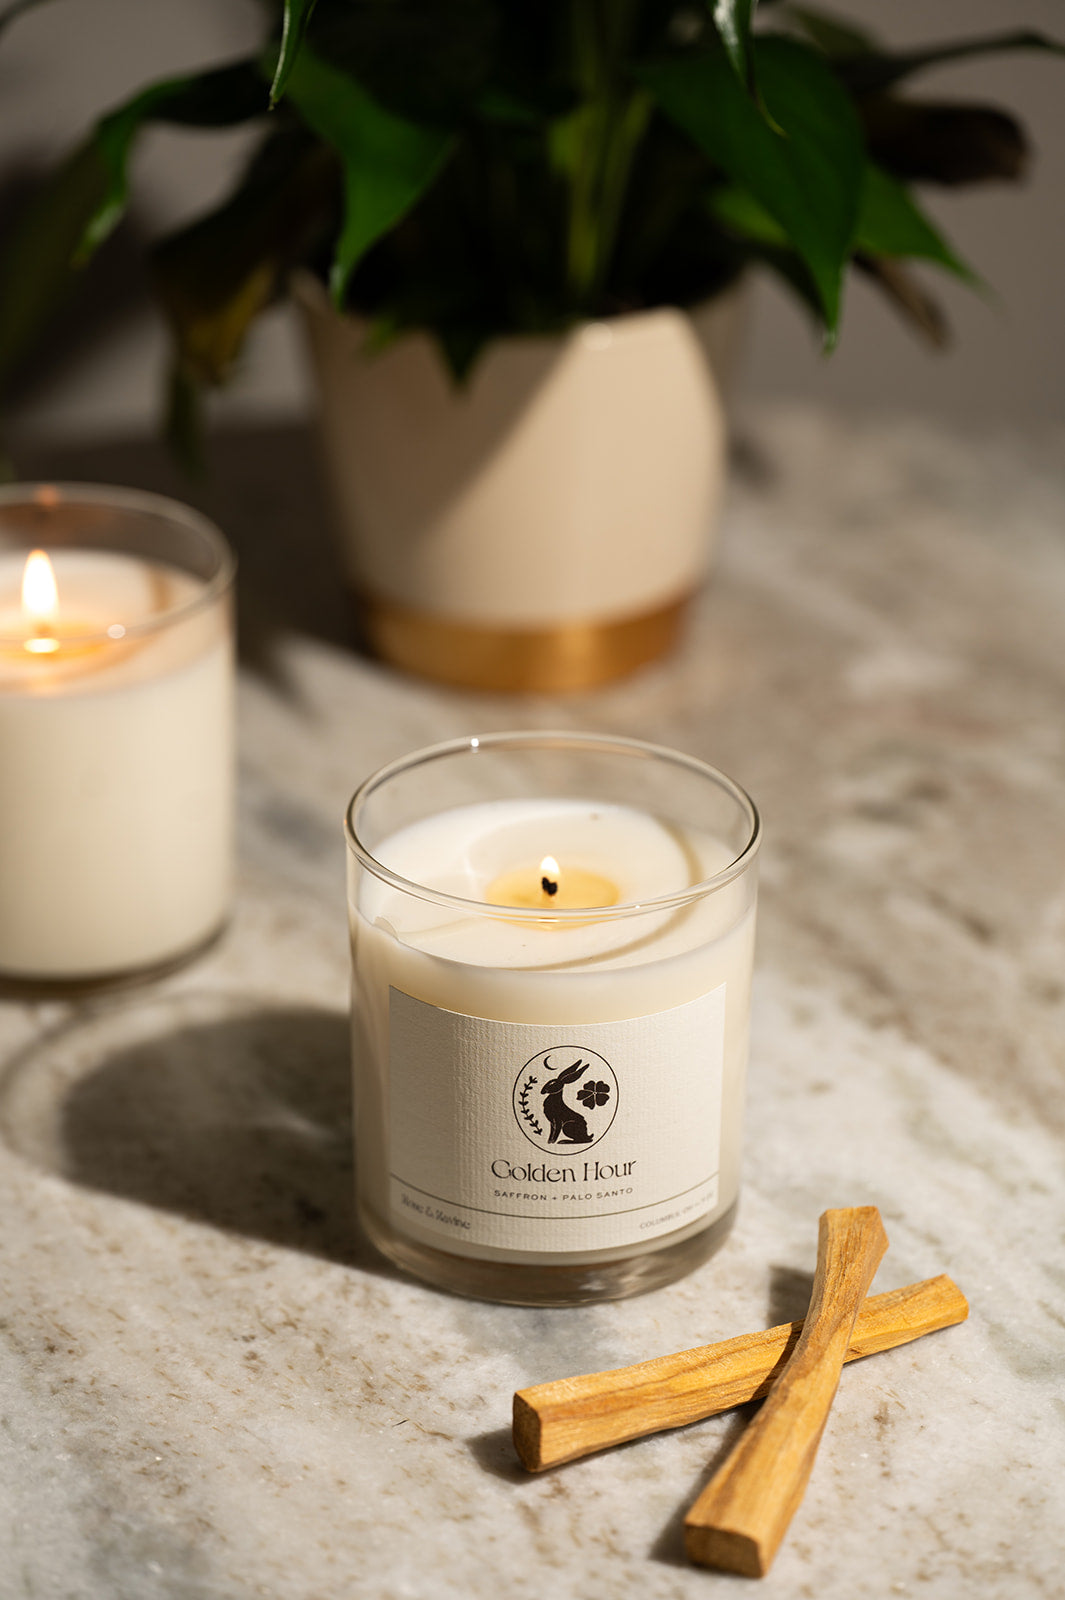 Golden Hour Candle, Rose and Ravine